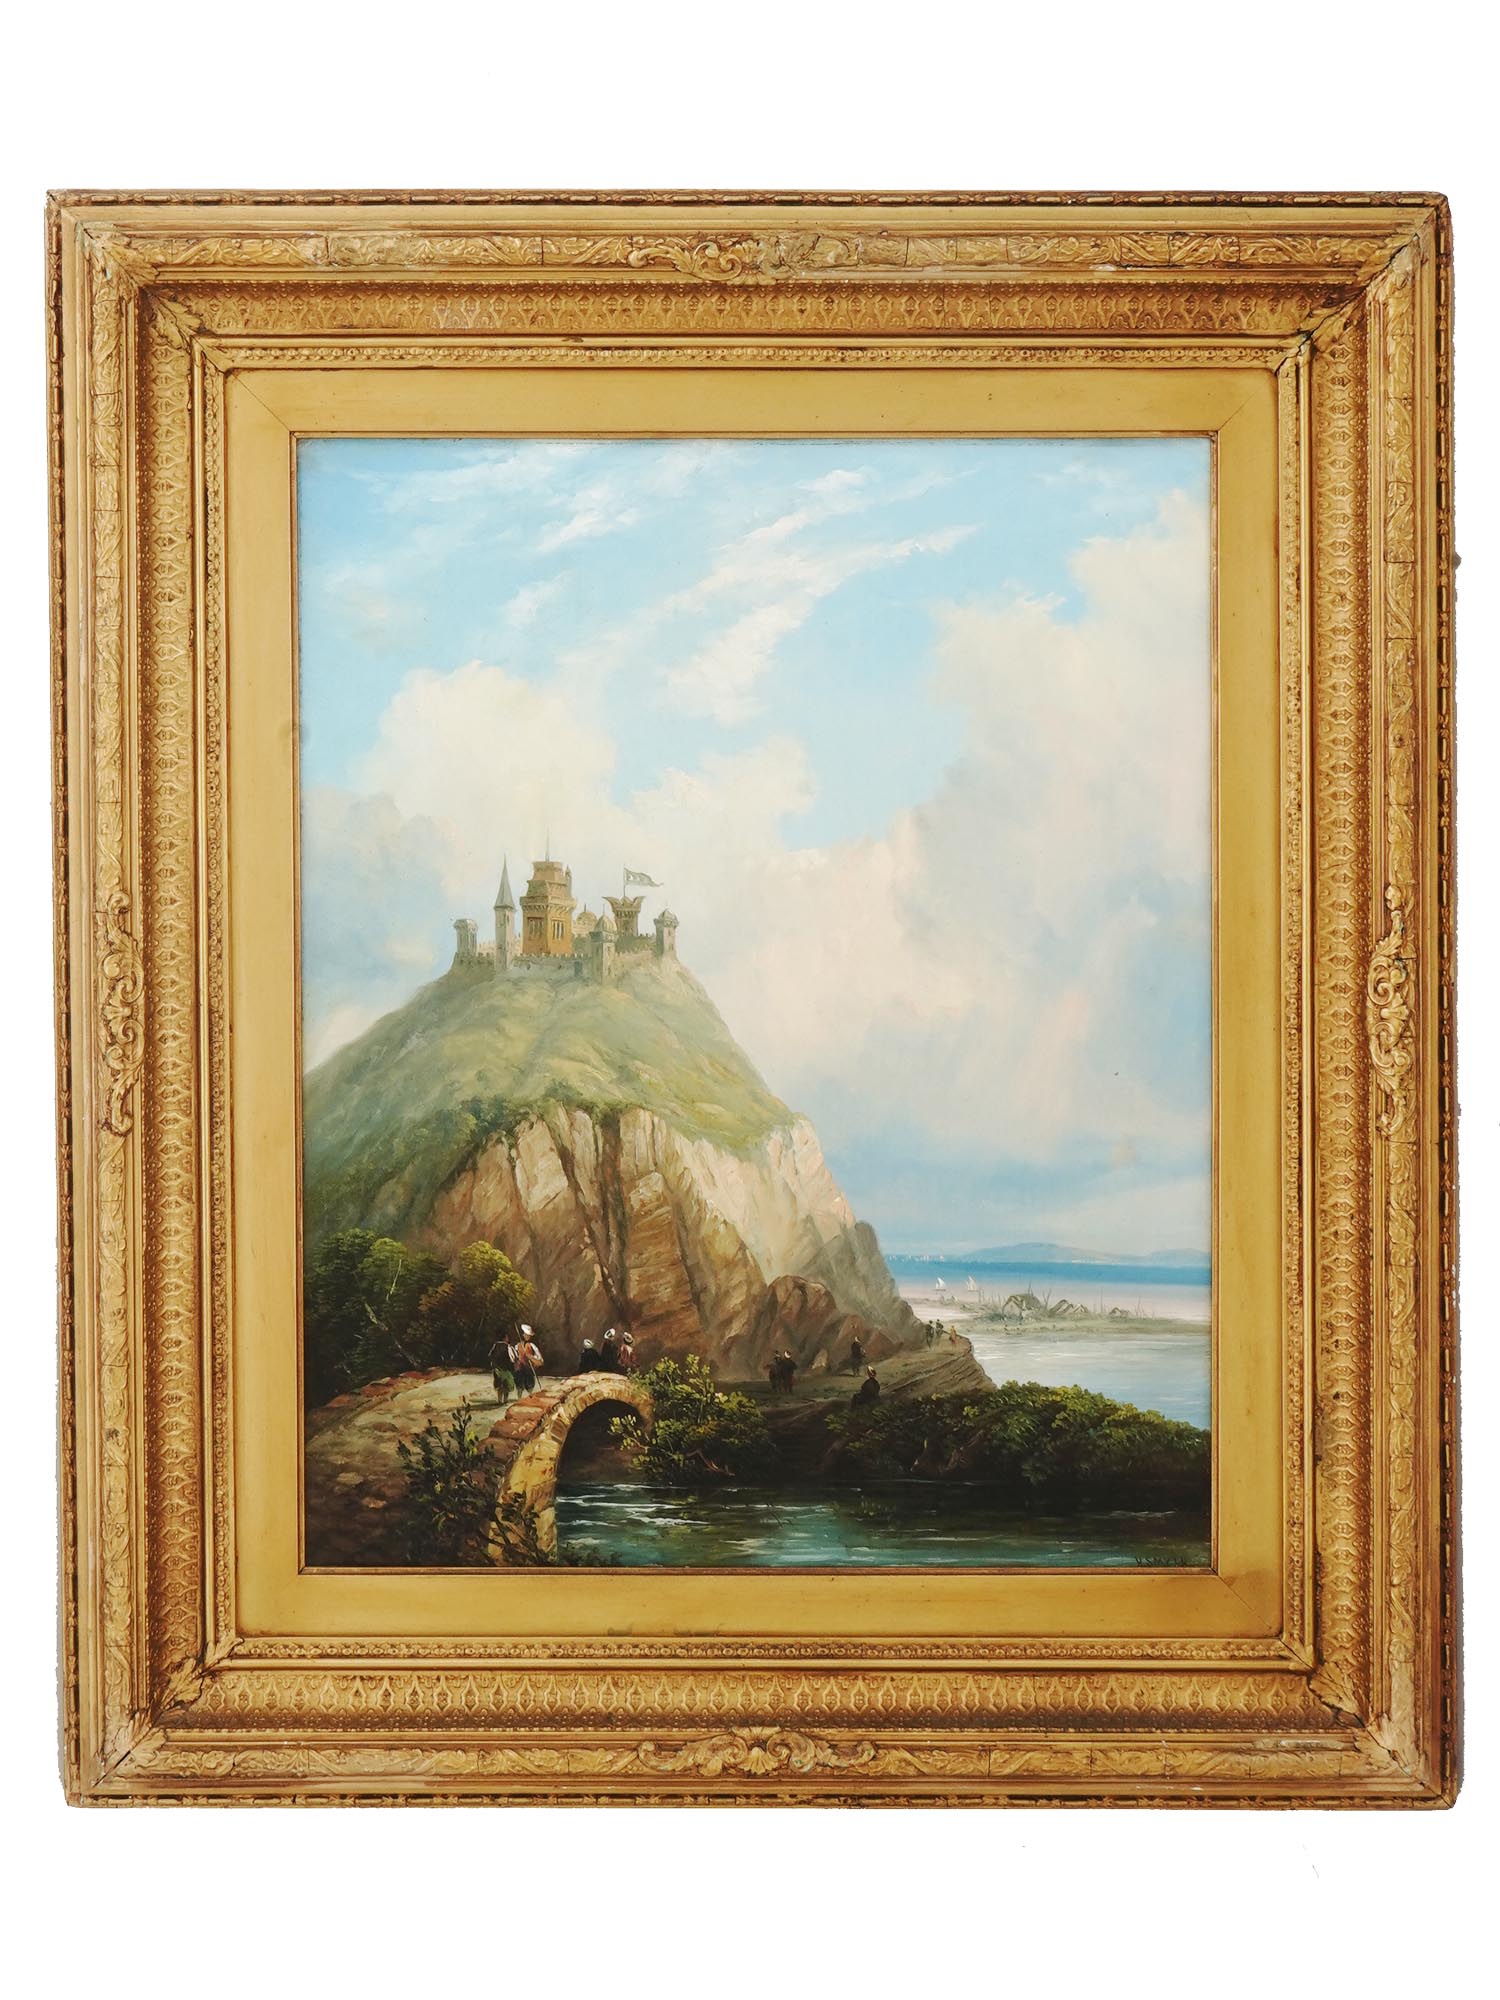 ENGLISH CASTLE LANDSCAPE OIL PAINTING BY HENRY SMYTH PIC-0